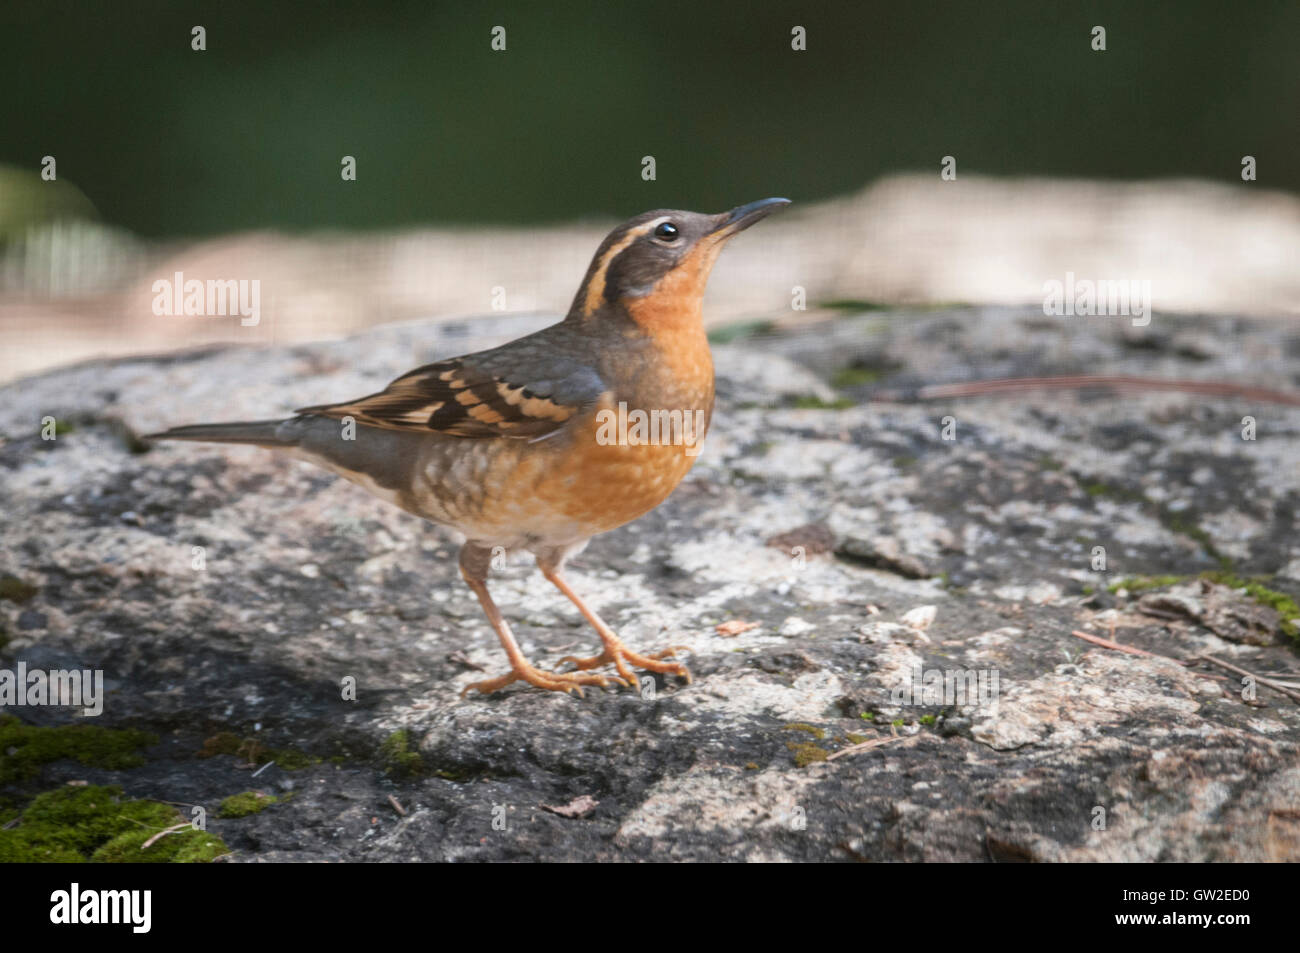 A Varied Thrush female on a migratory visit to the Sierra Foothills of Northern California. Stock Photo